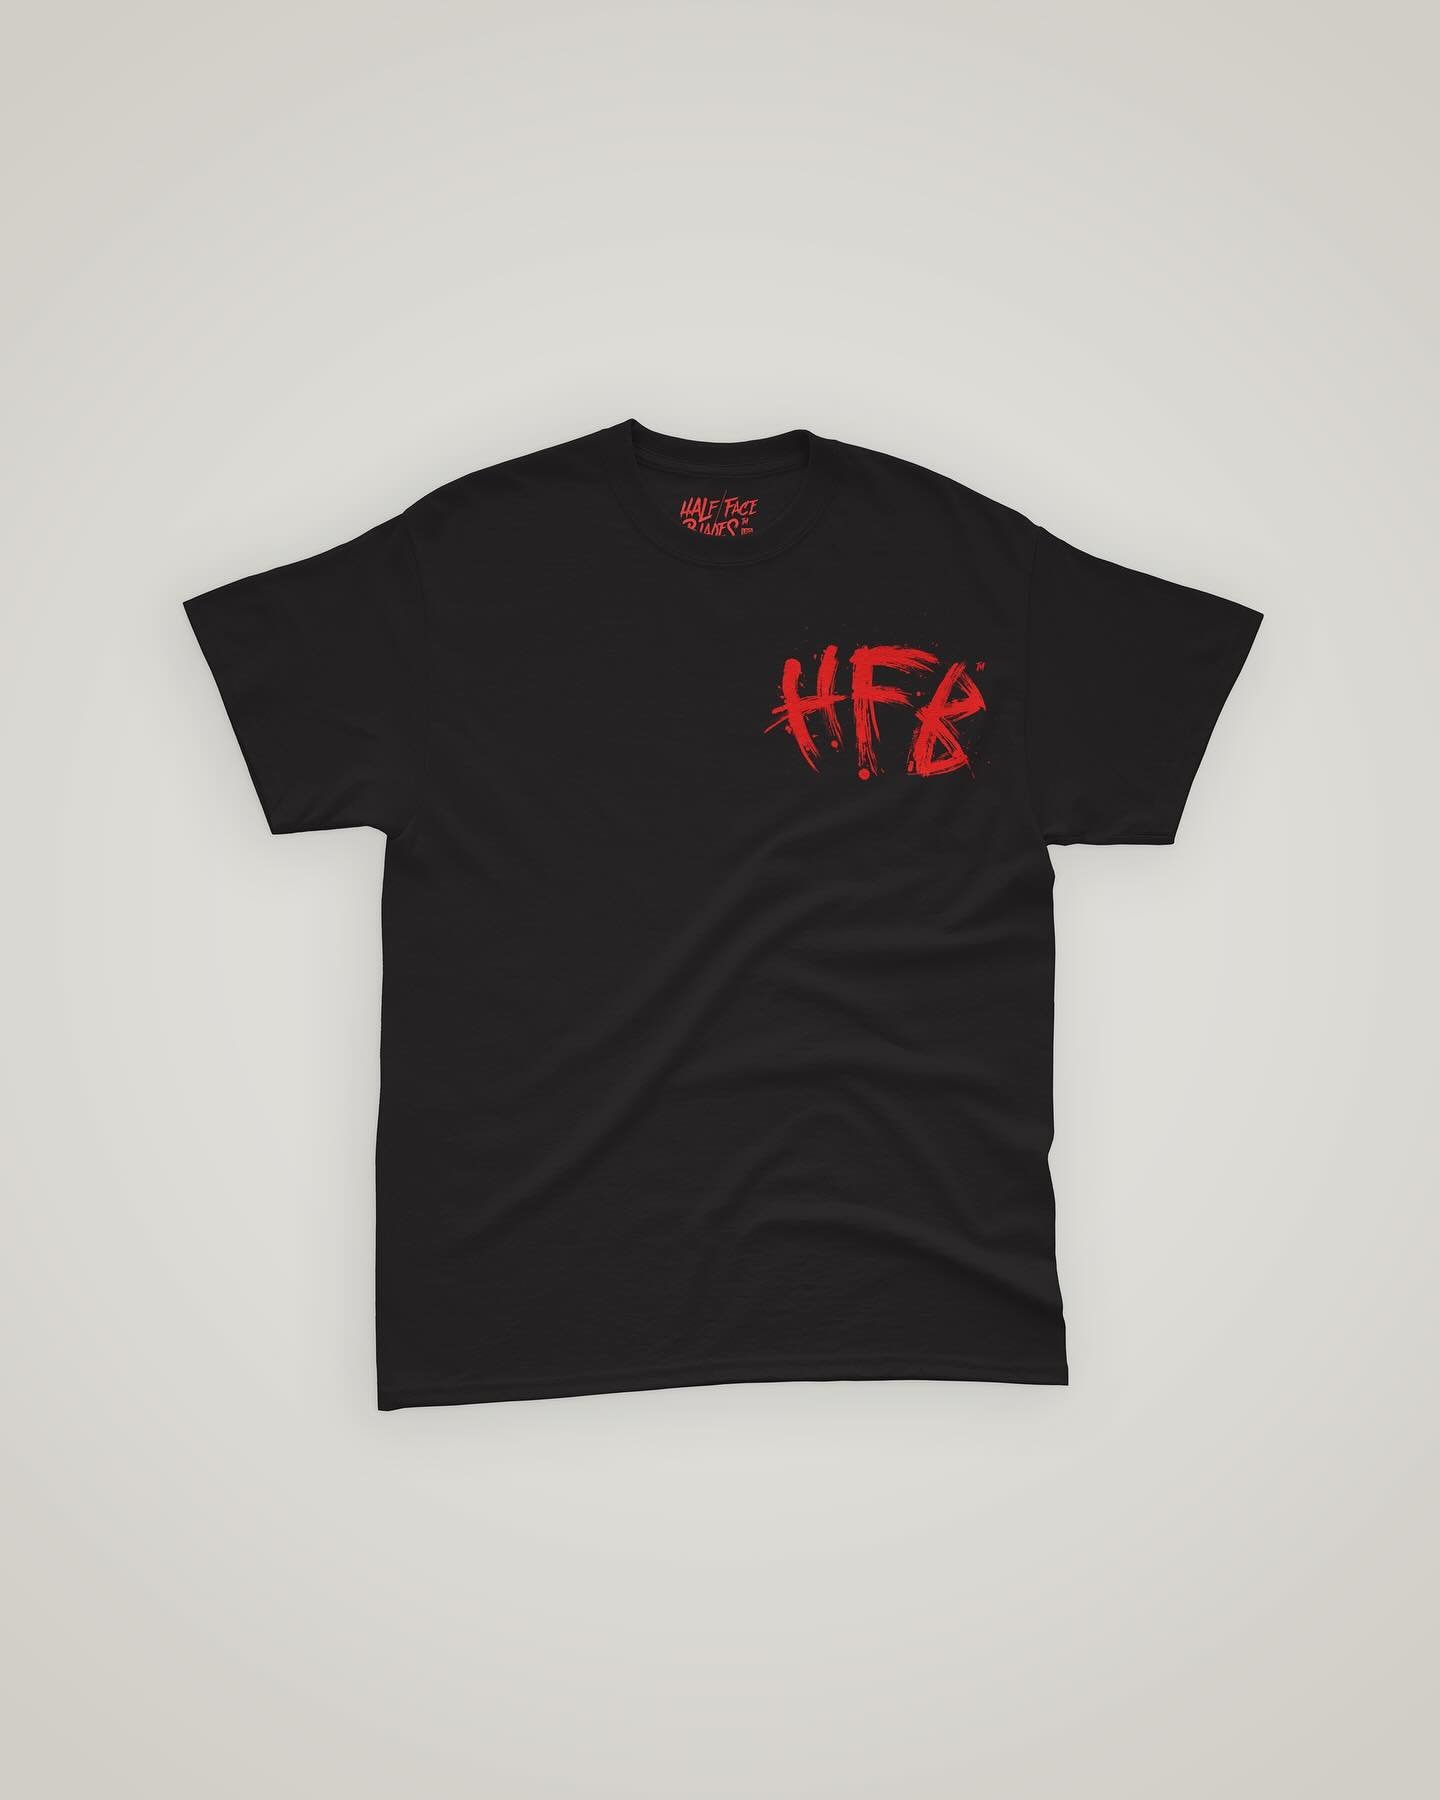 WHICH @halffaceblades merch do you want❓

&ldquo;COUNTING COUP&rdquo; - A HFB CUSTOM TYPEFACE 

Whenever we&rsquo;re asked to create Merch for a company, we need to know: what is the Brand❓

What&rsquo;s the feeling you want to evoke in customers &md